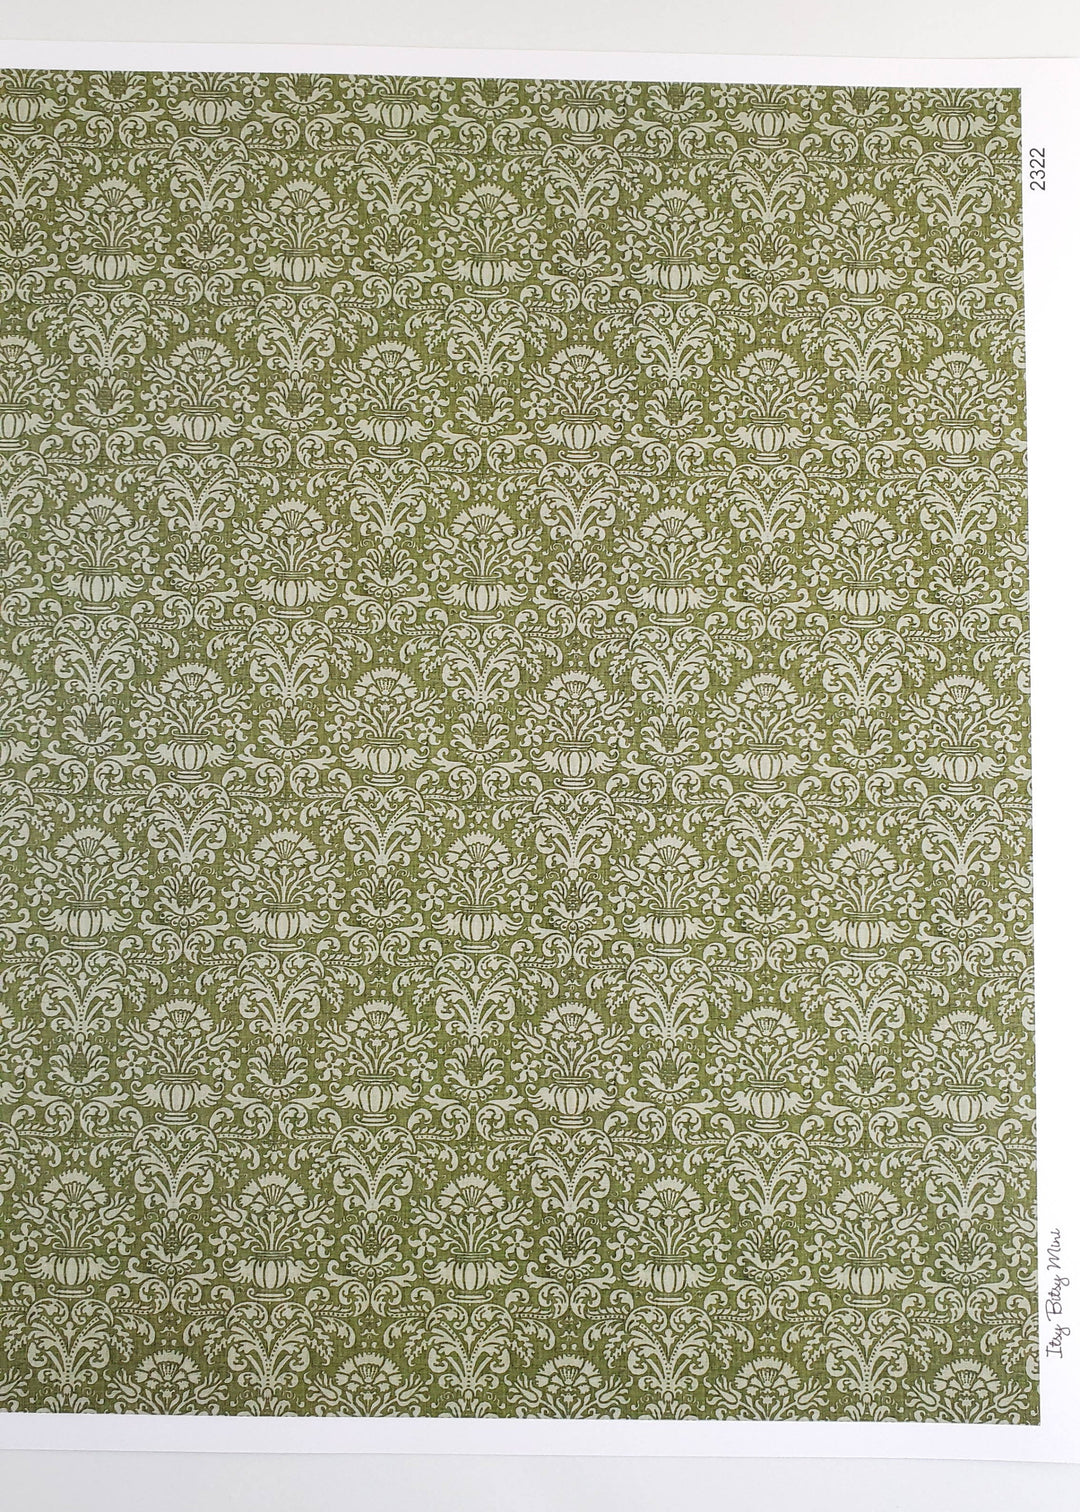 Dollhouse Wallpaper Damask Olive Green Victorian 1:12 Scale Itsy Bitsy Miniatures